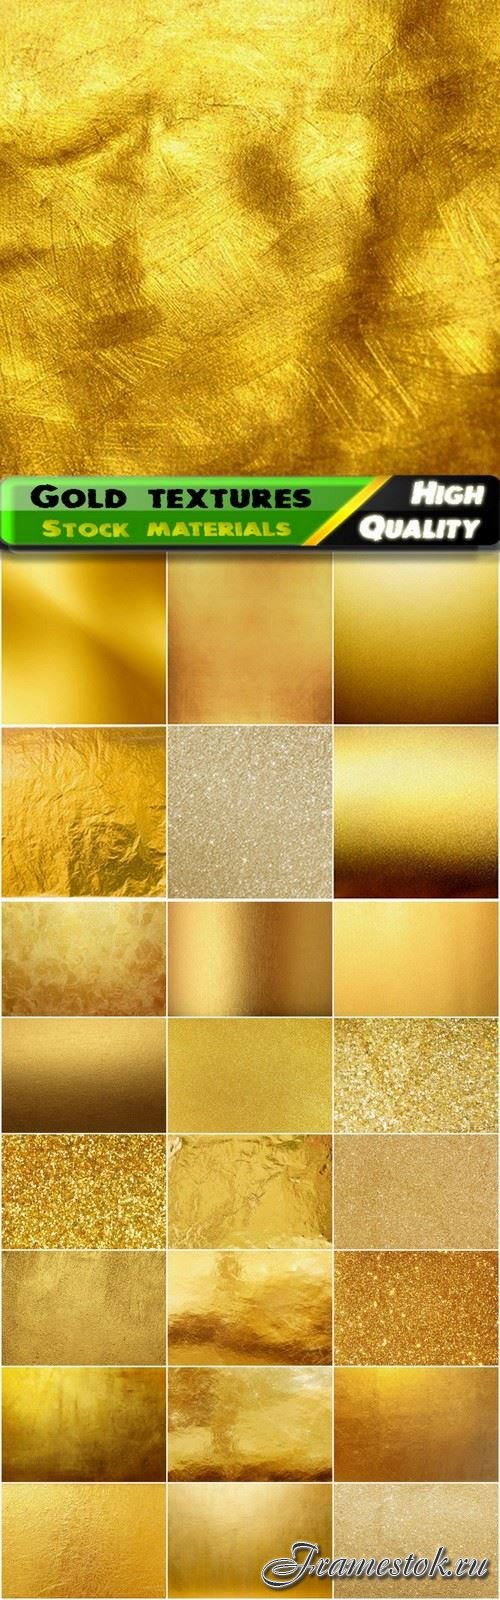 Gold textures and glitter backgrounds - 25 HQ Jpg